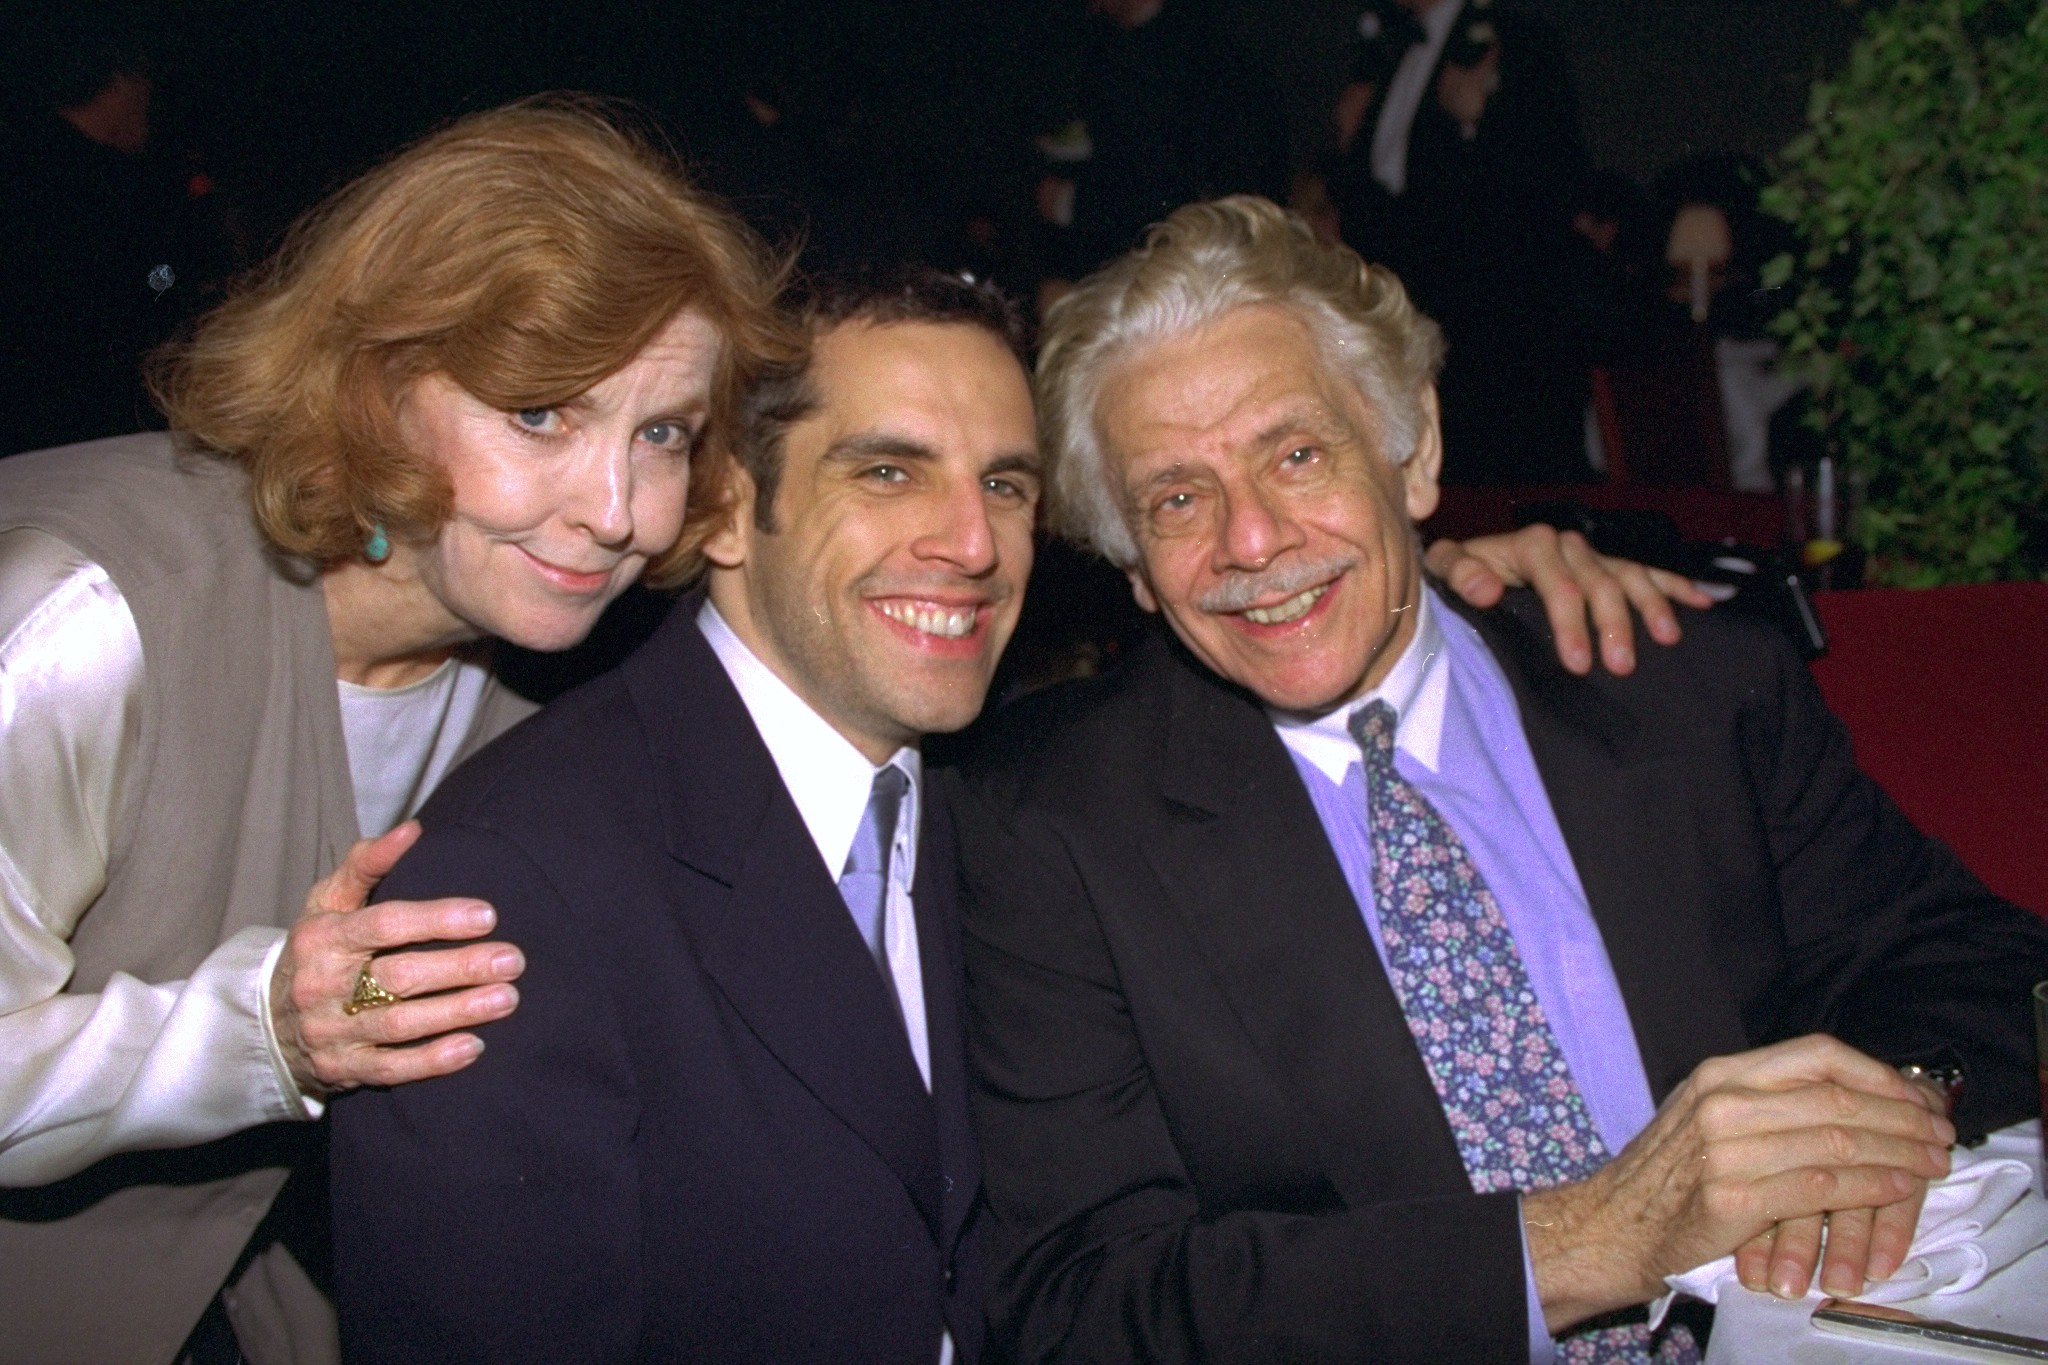 Ben Stiller with his parents, Jerry Stiller and Anne Meara, at the benefit party for the movie premiere of "Flirting with Disaster" at Laura Belle restaurant on March 18, 1996 | Source: Getty Images